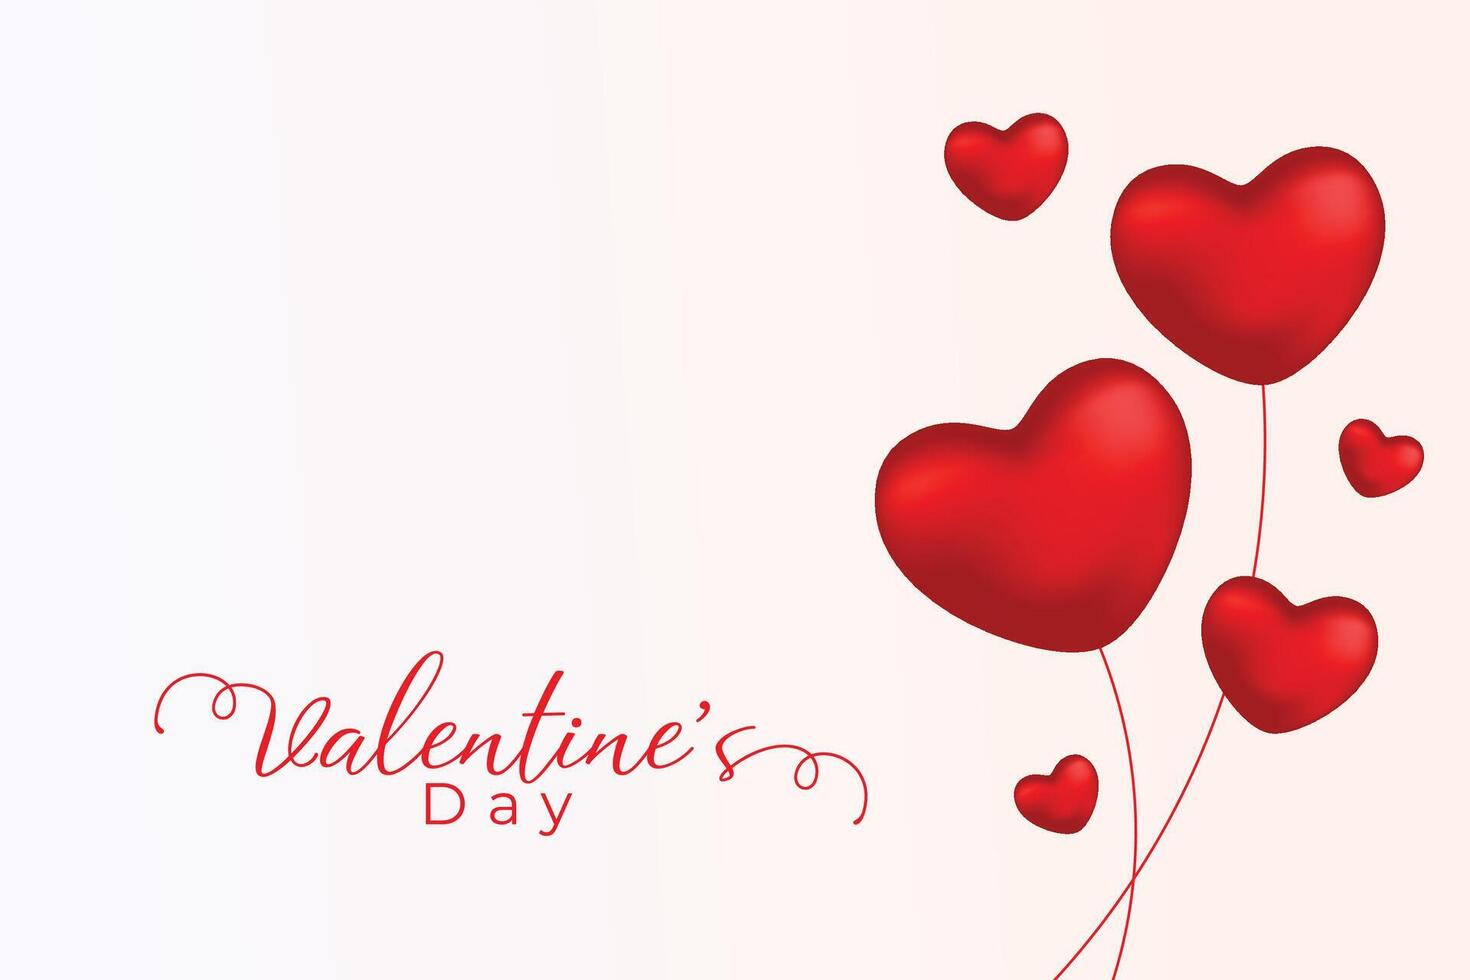 valentine's day event background with heart balloon vector